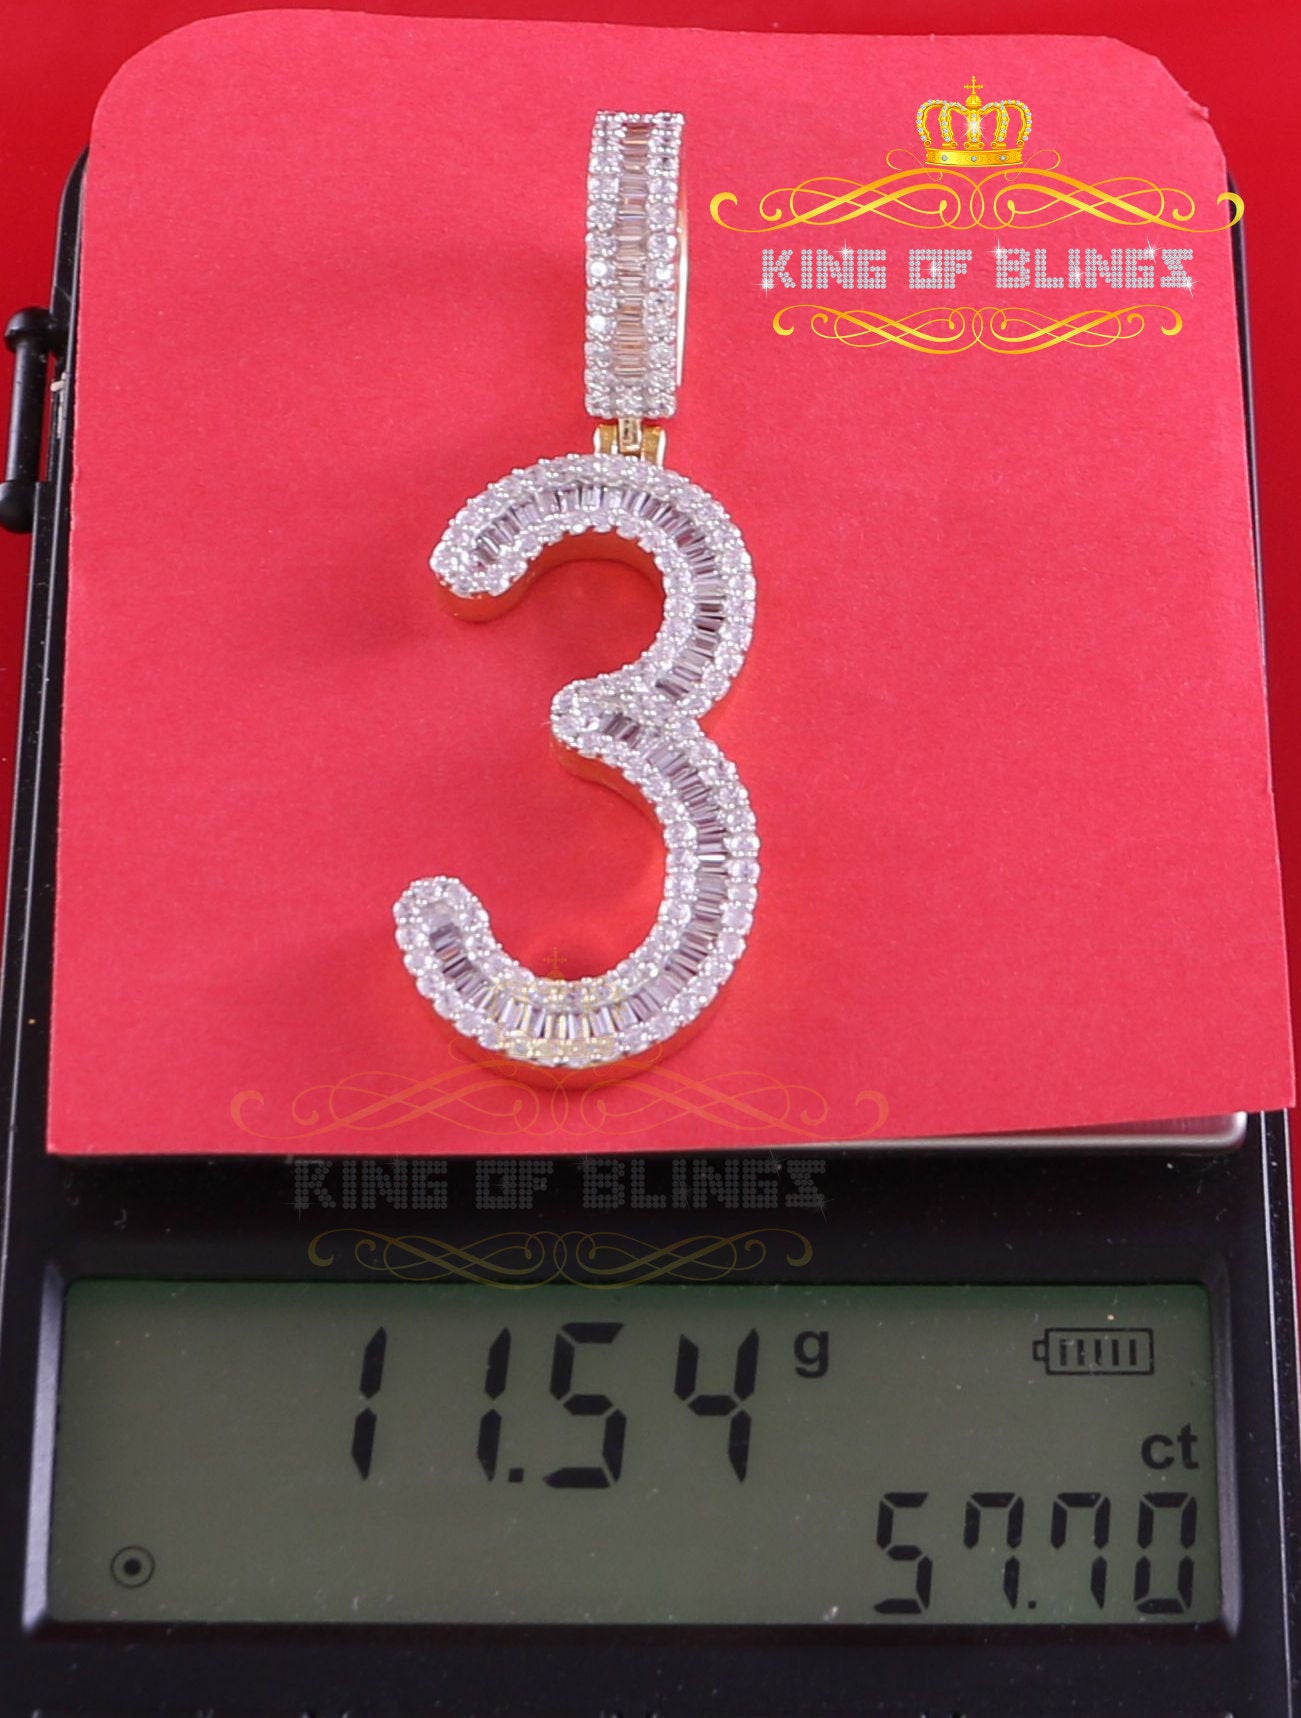 Yellow Sterling Silver Baguette Numeric Number 3 Pendant 4.65ct Cubic Zirconia KING OF BLINGS